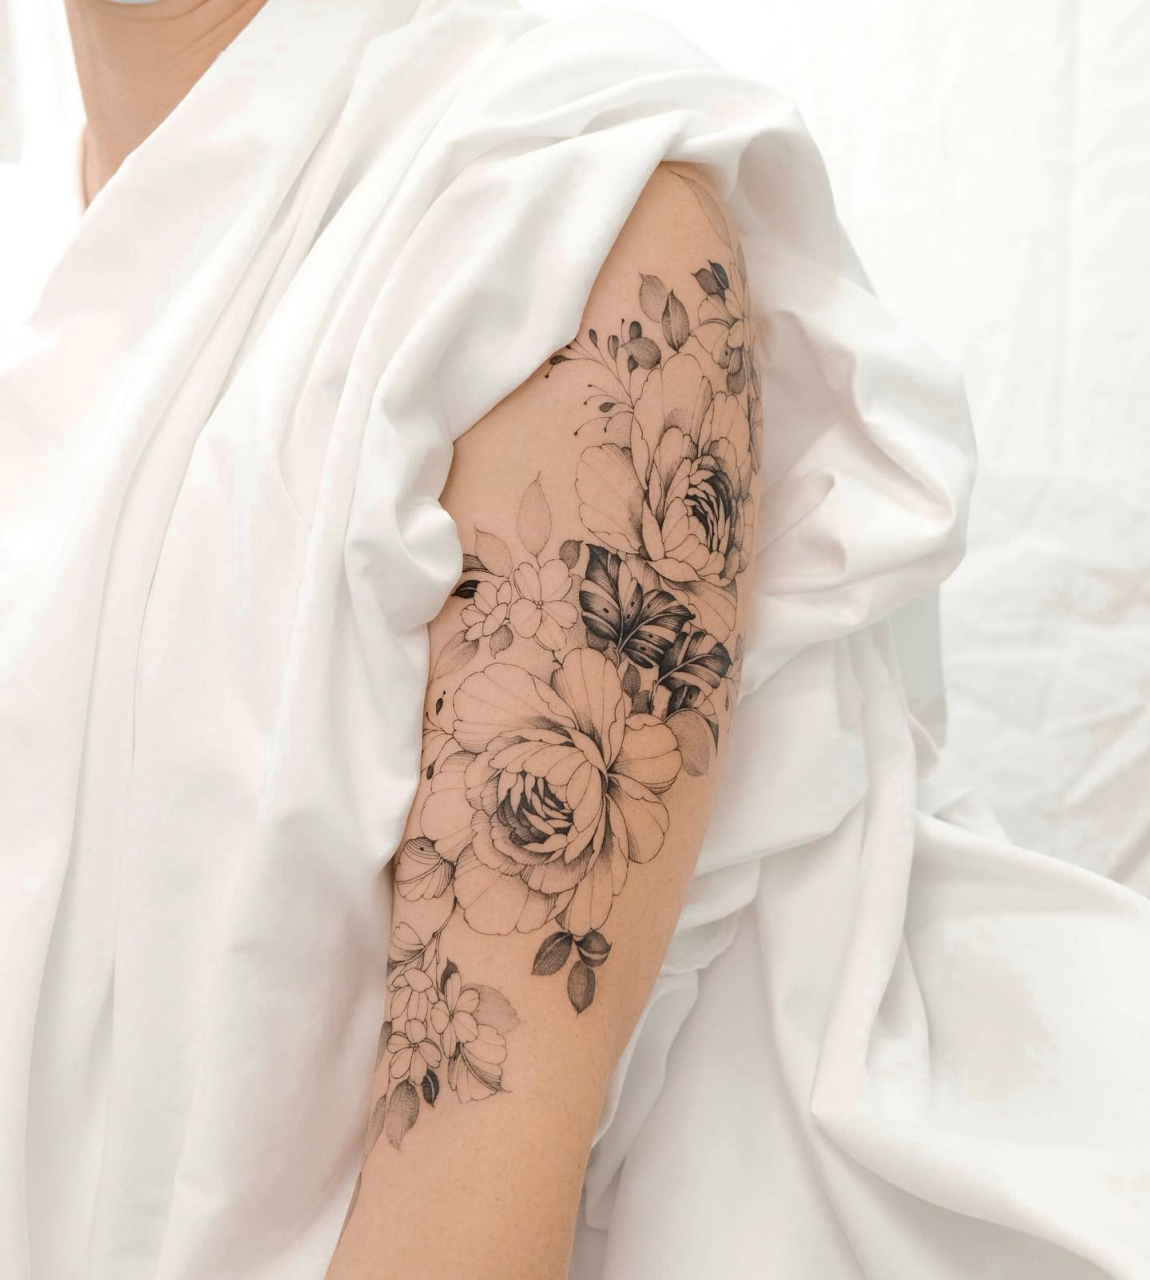 40 Stunning Butterfly Tattoo Designs to Inspire Your Next Ink